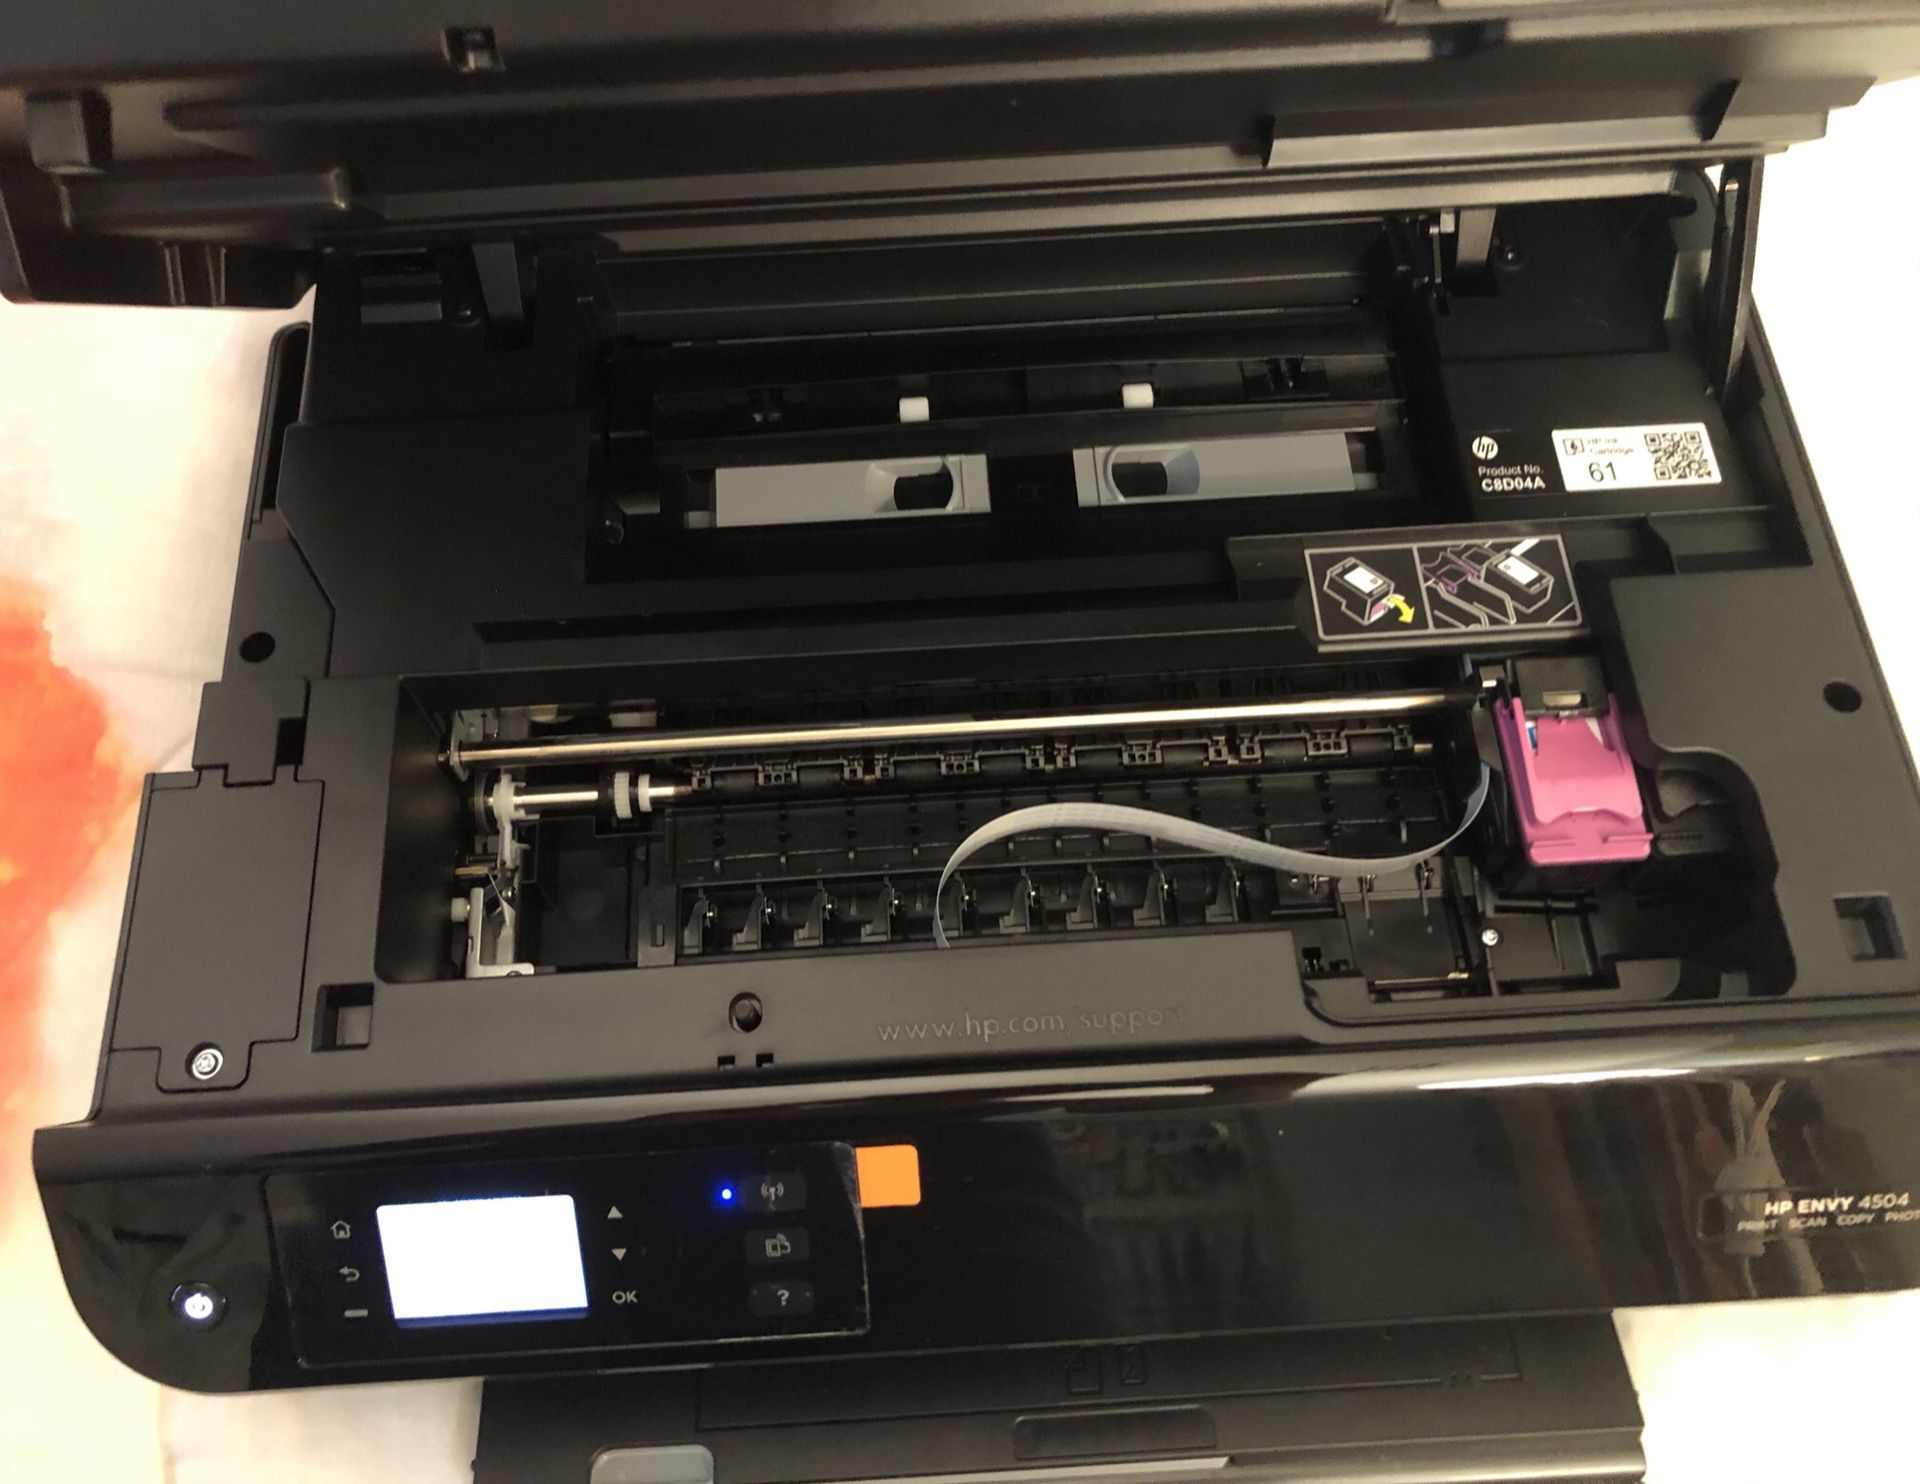 Helligdom mangfoldighed gyldige HP ENVY 4505 All in One Printer for Sale in Miami, FL - OfferUp